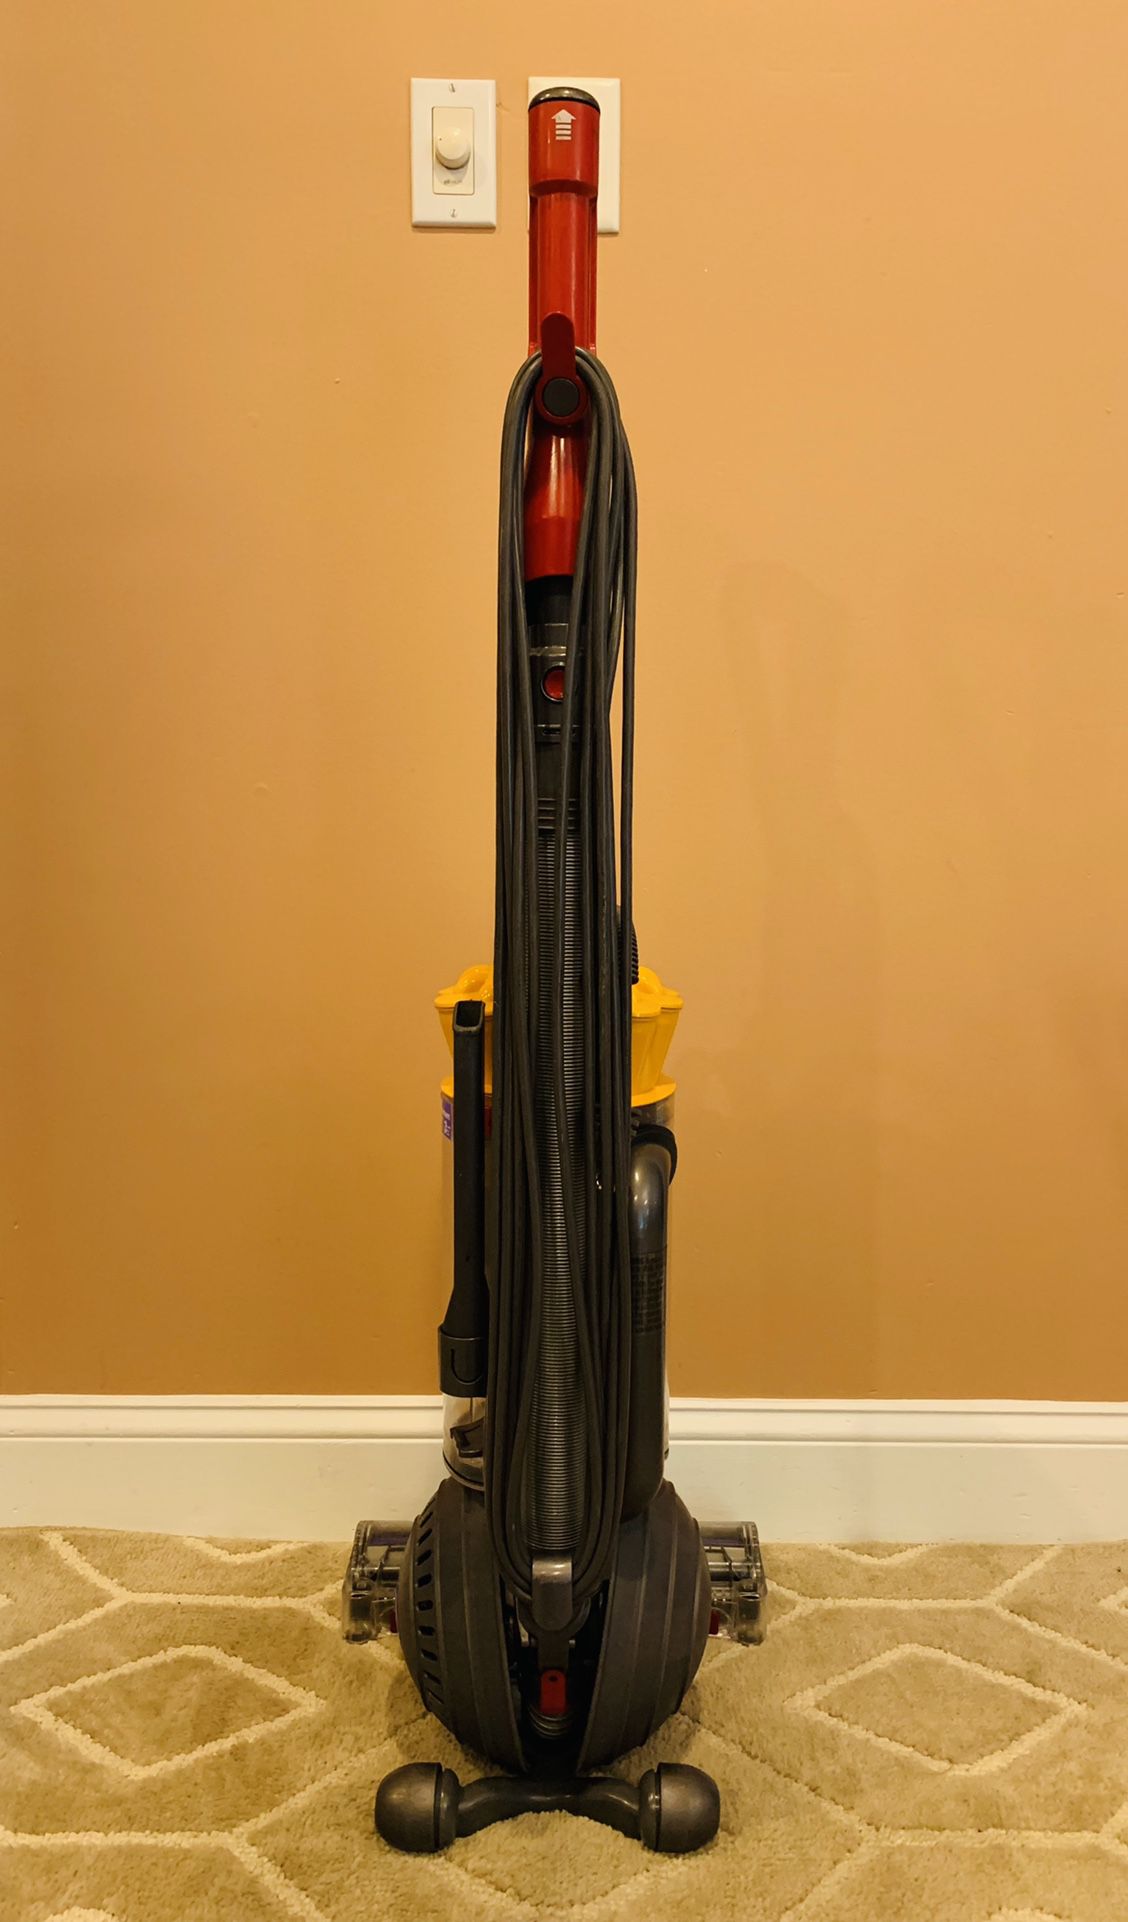 Dyson DC 65 ball vacuum cleaner